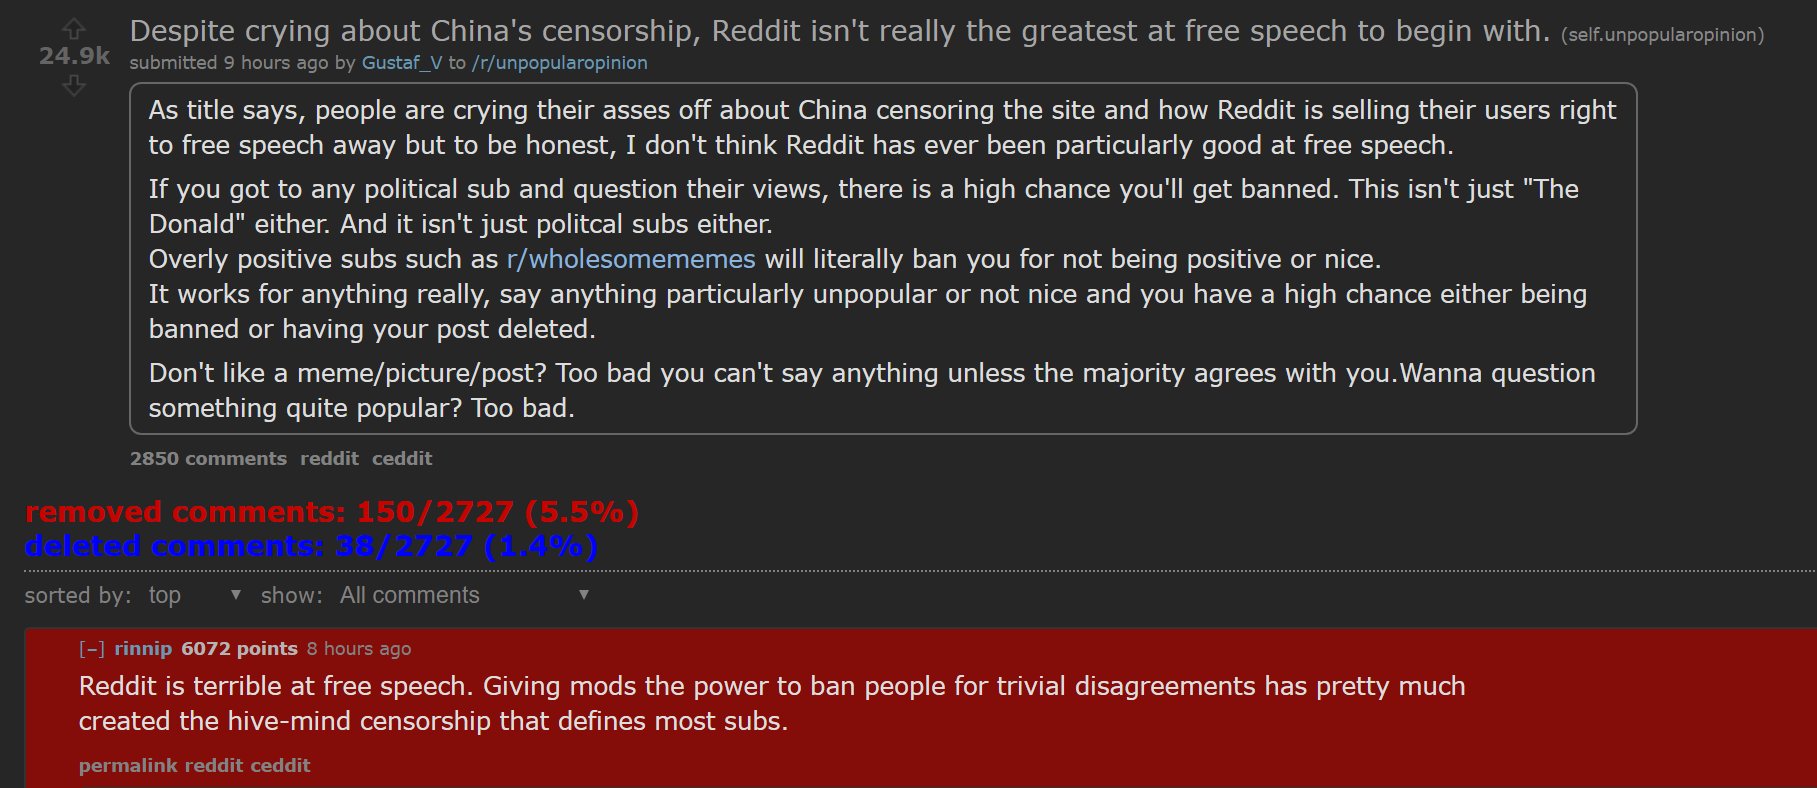 Reddit mods trying their hand at irony : MeanwhileOnReddit